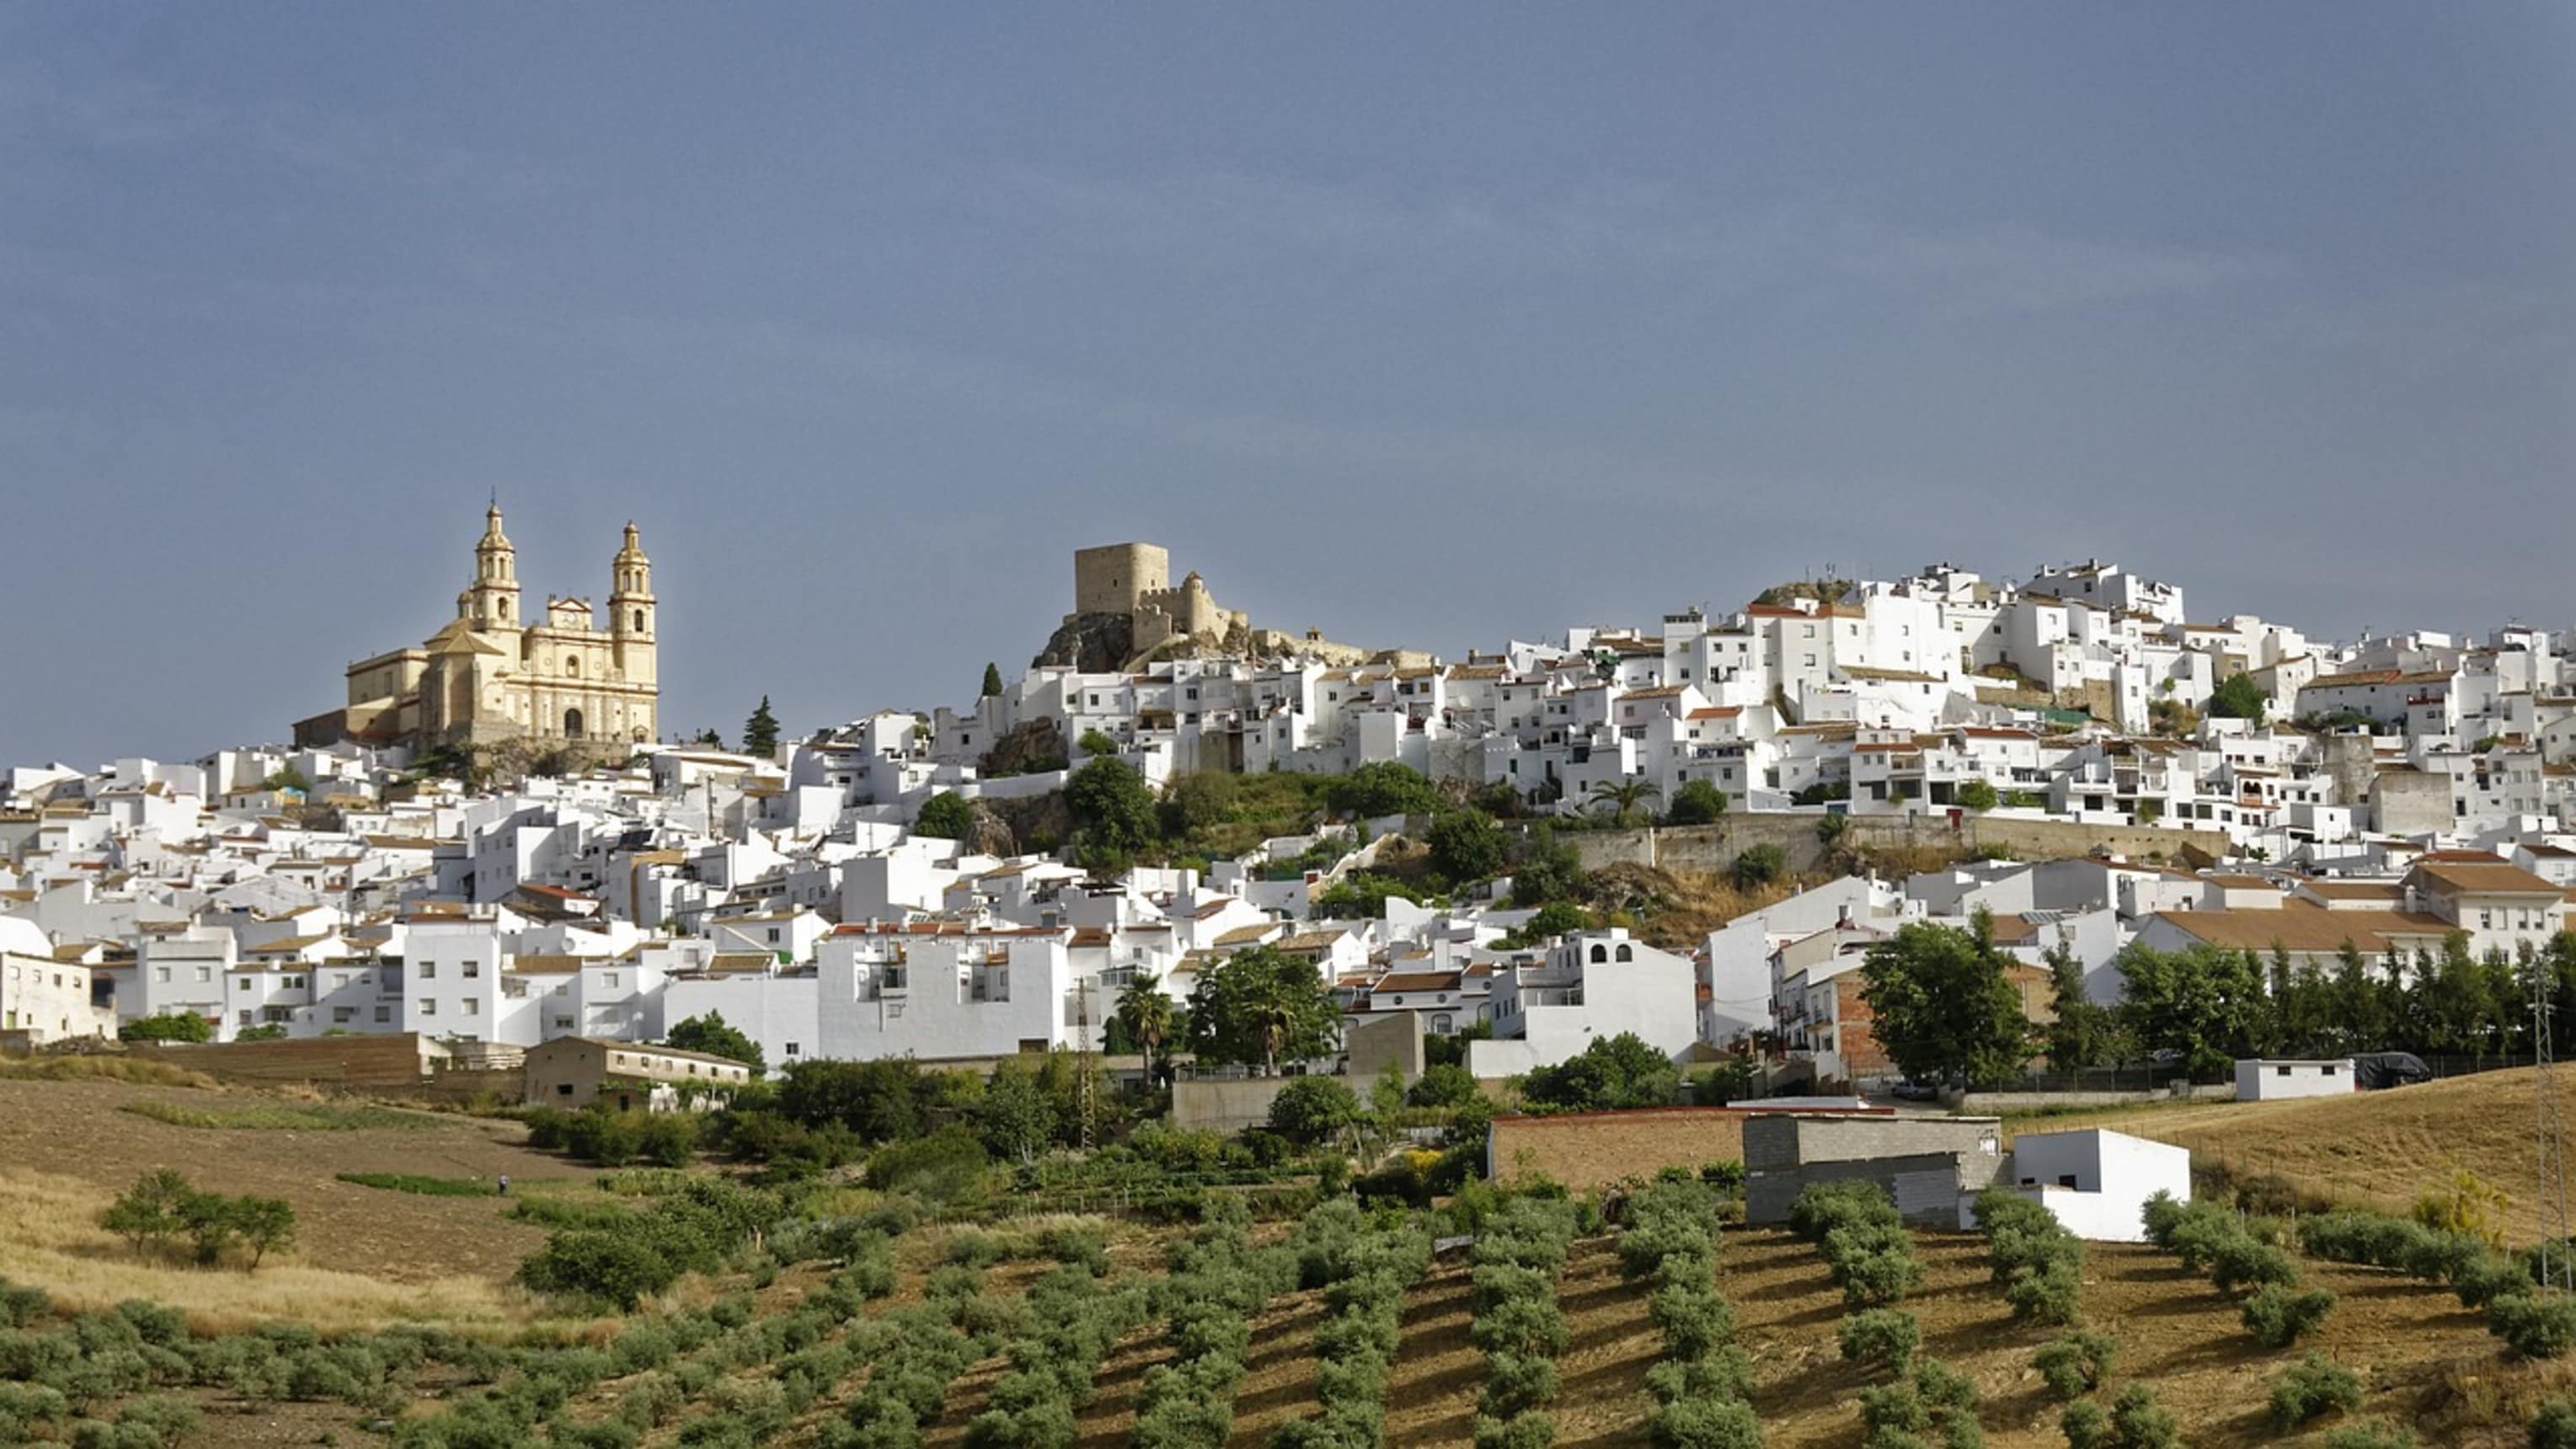 A typical scene inland in Andalusia 